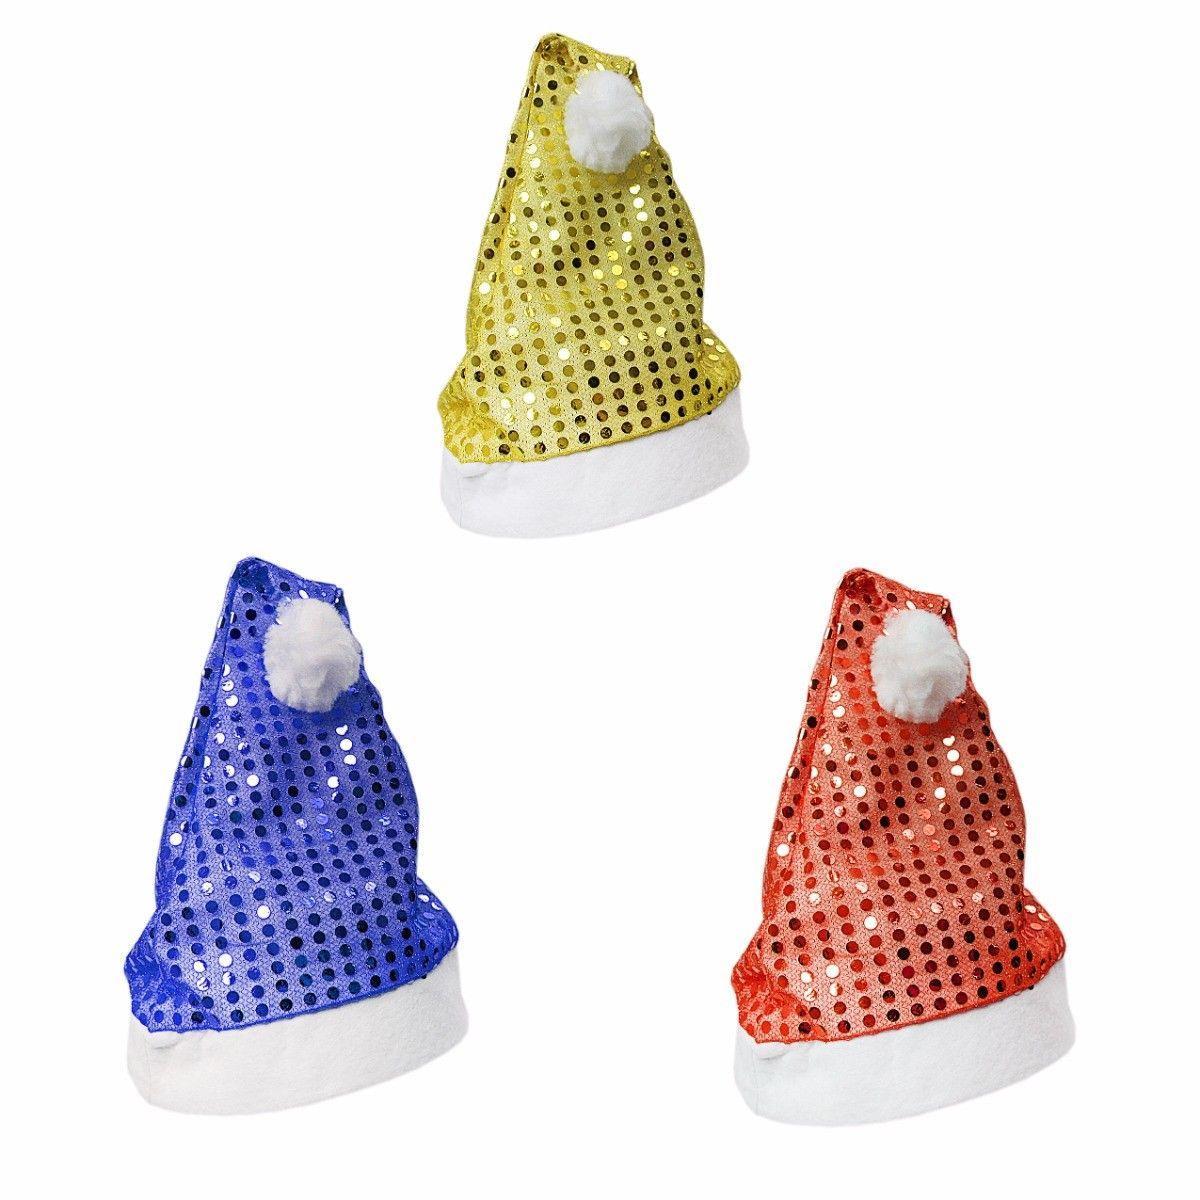 Christmas Santa Polka Dot Hat One Size Assorted Colours 4630 (Large Letter Rate)